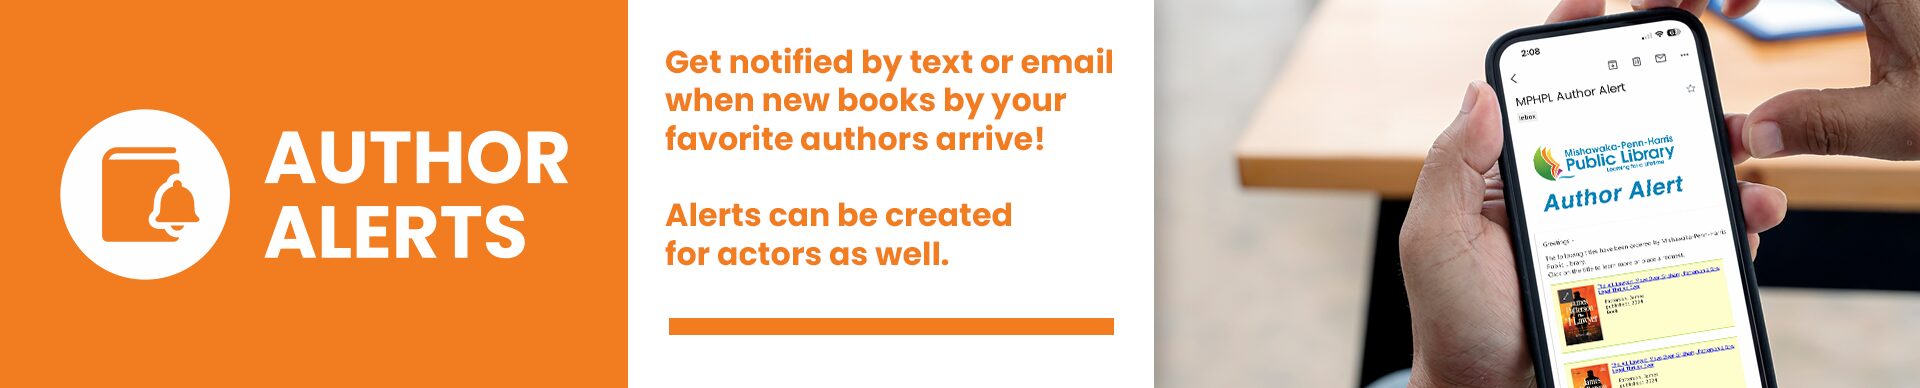 A person holding a smartphone, on the screen, it shows the Mishawaka-Penn-Harris Public Library logo.  'Author Alerts. Get notified by text or email when new books by your favorite authors arrive! Alerts can be created for actors as well.’